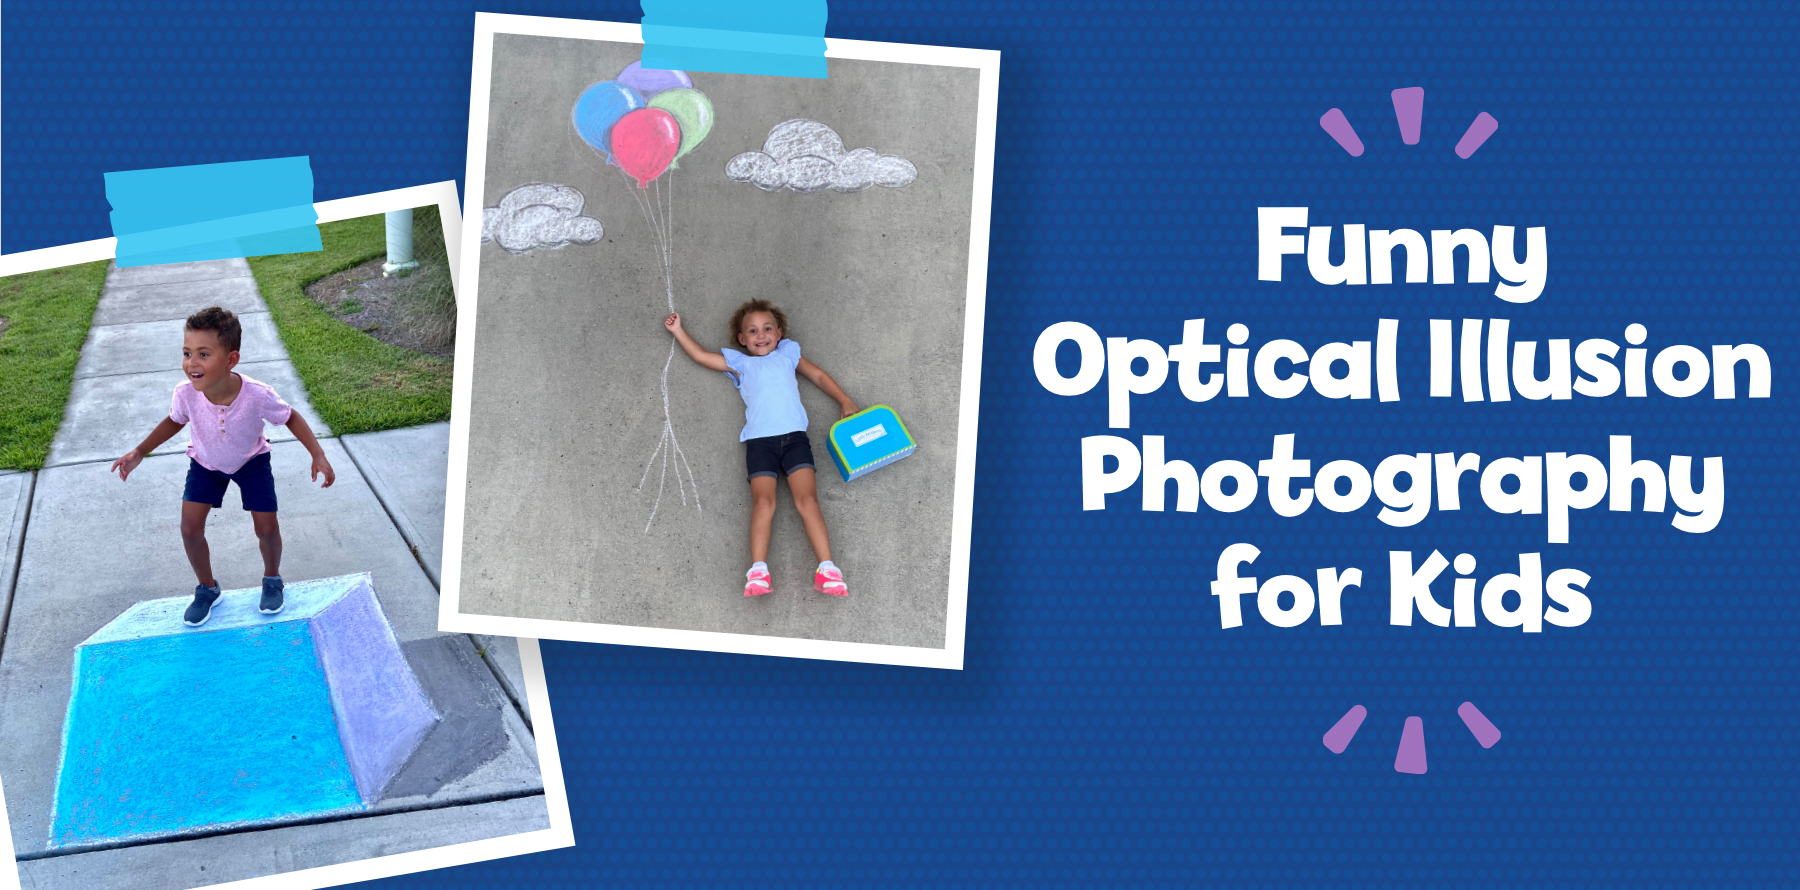 Funny Optical Illusion Photography for Kids